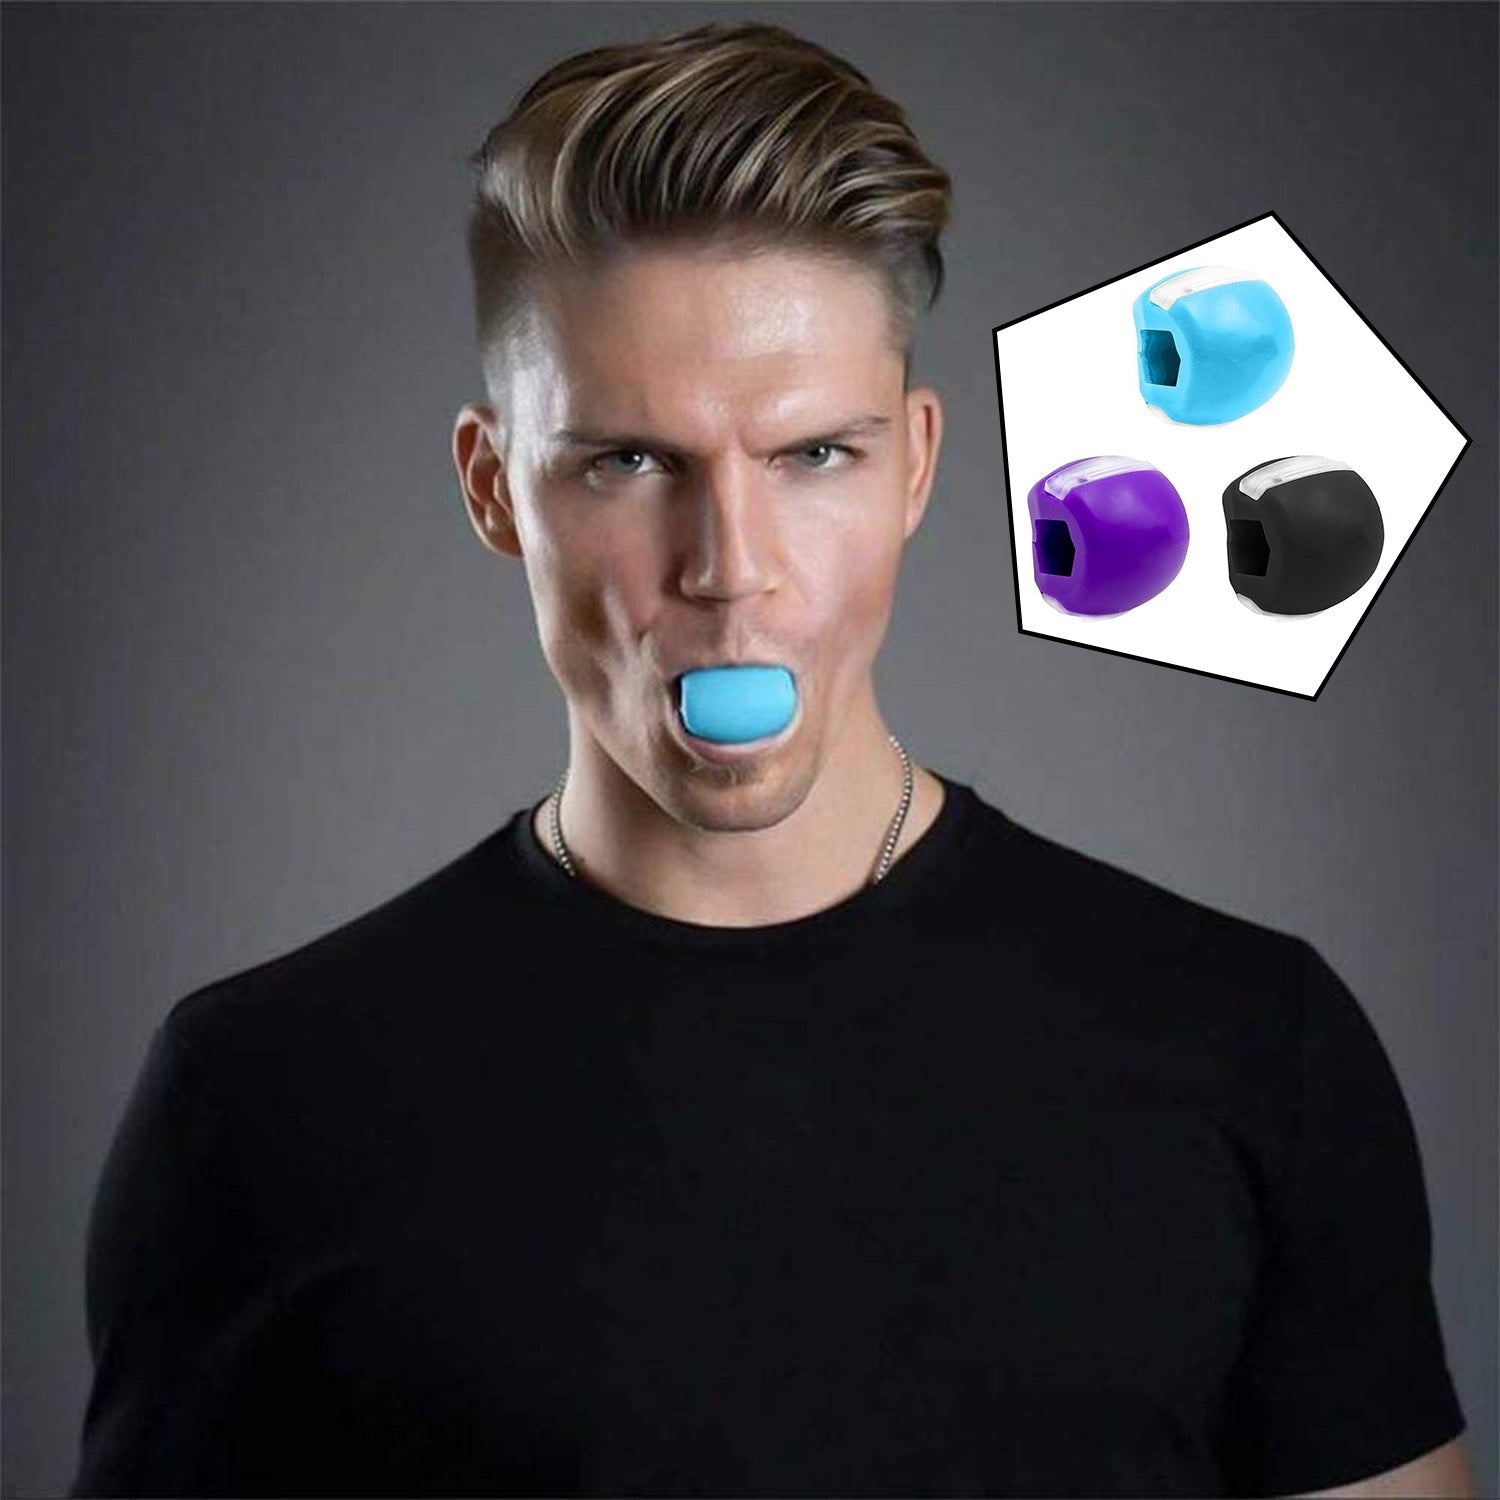 6101A Jawline Exerciser To Define Your Jawline (1Pc In Color Box)